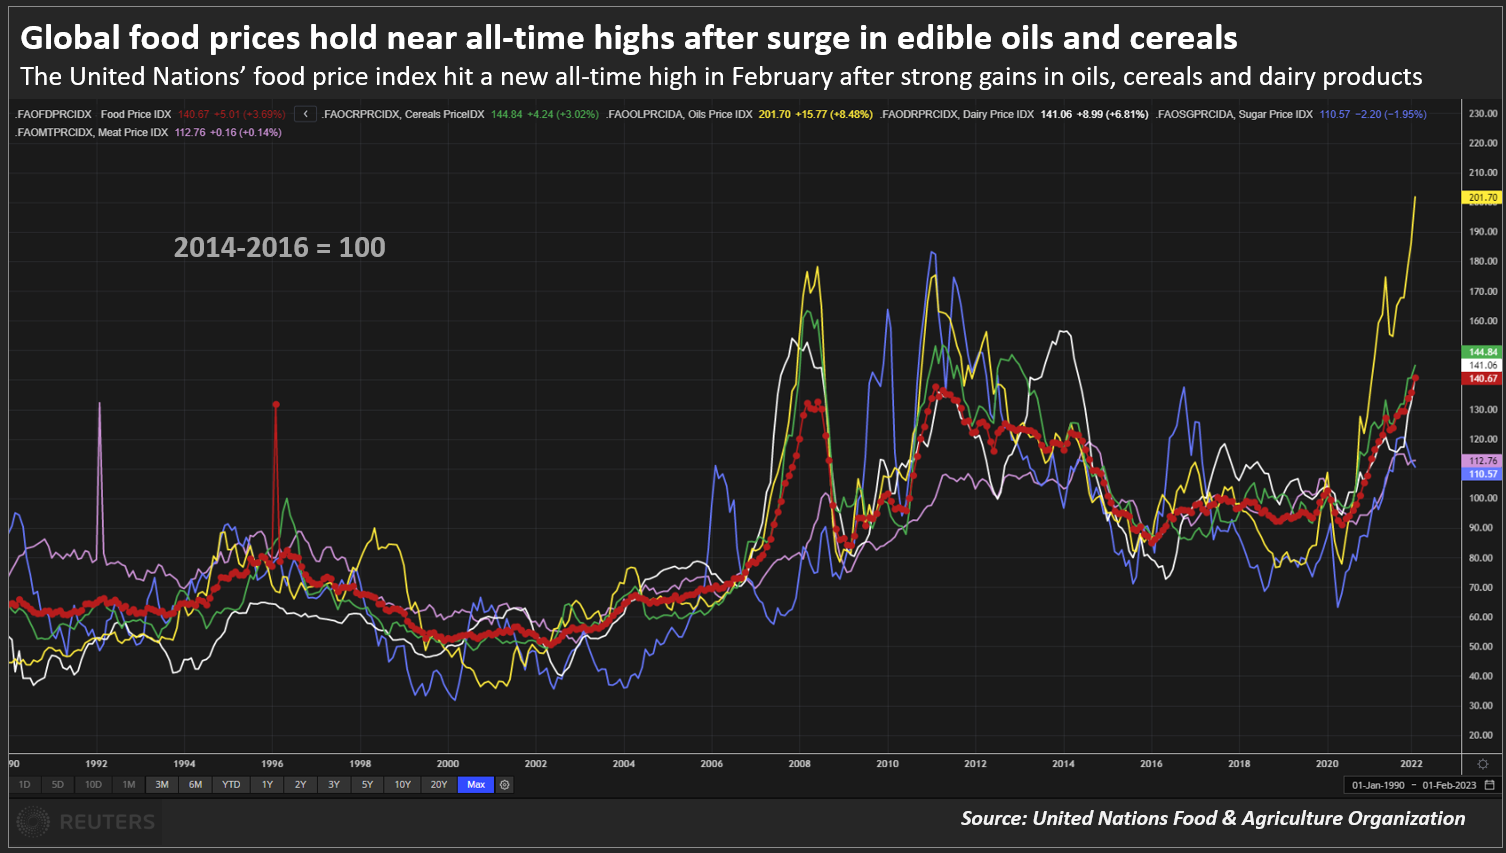 Global food prices hold near all-time highs after surge in edible oils and cereals